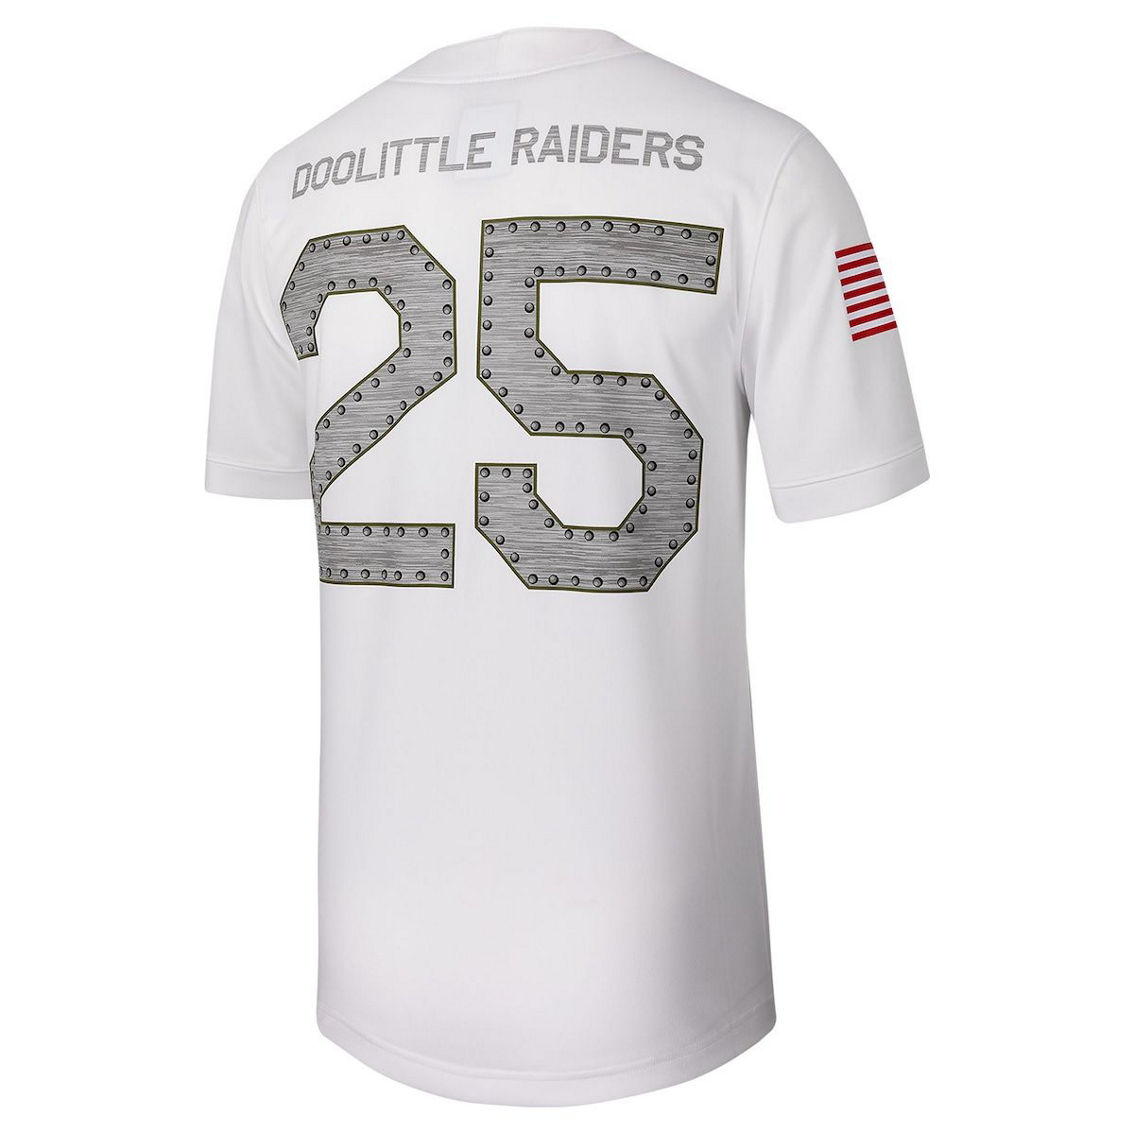 Nike Men's #25 White Air Force Falcons Untouchable Football Replica Jersey - Image 4 of 4